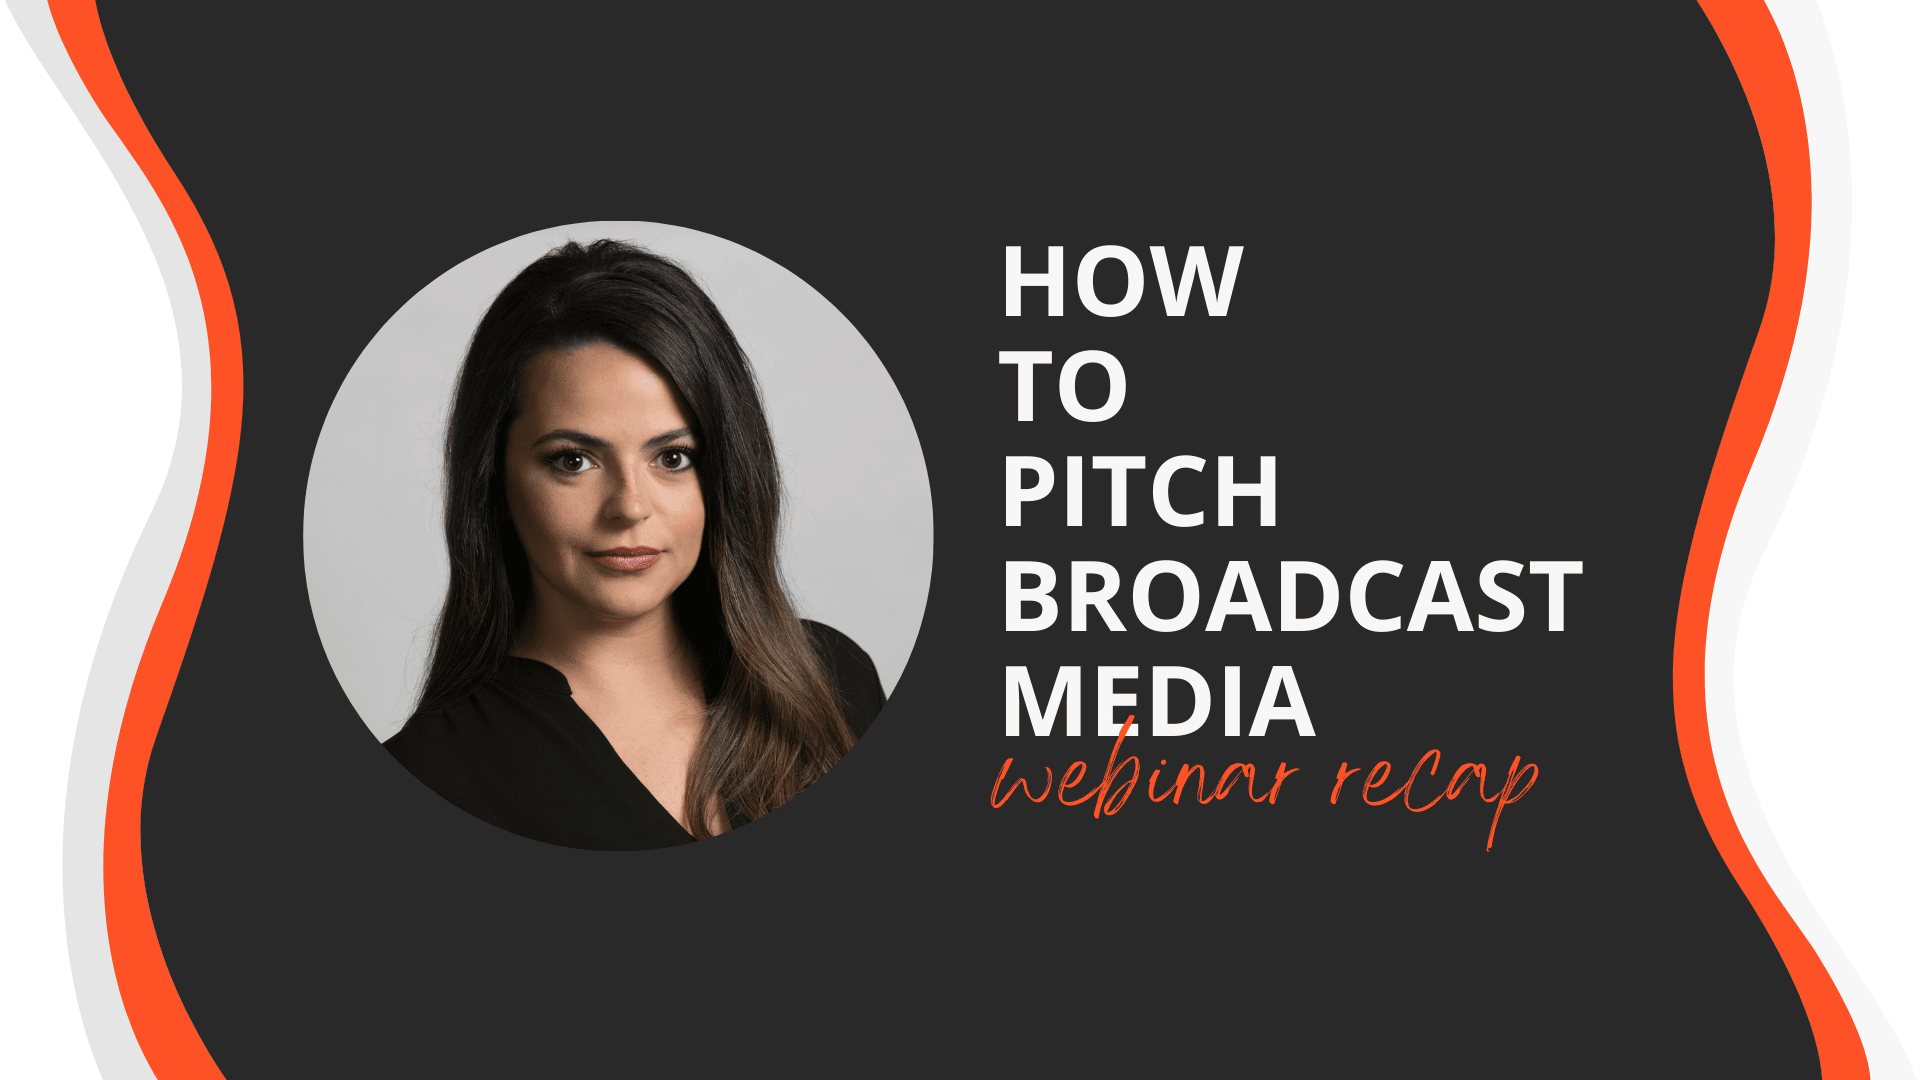 How to pitch broadcast media: Secrets from a former TV journalist